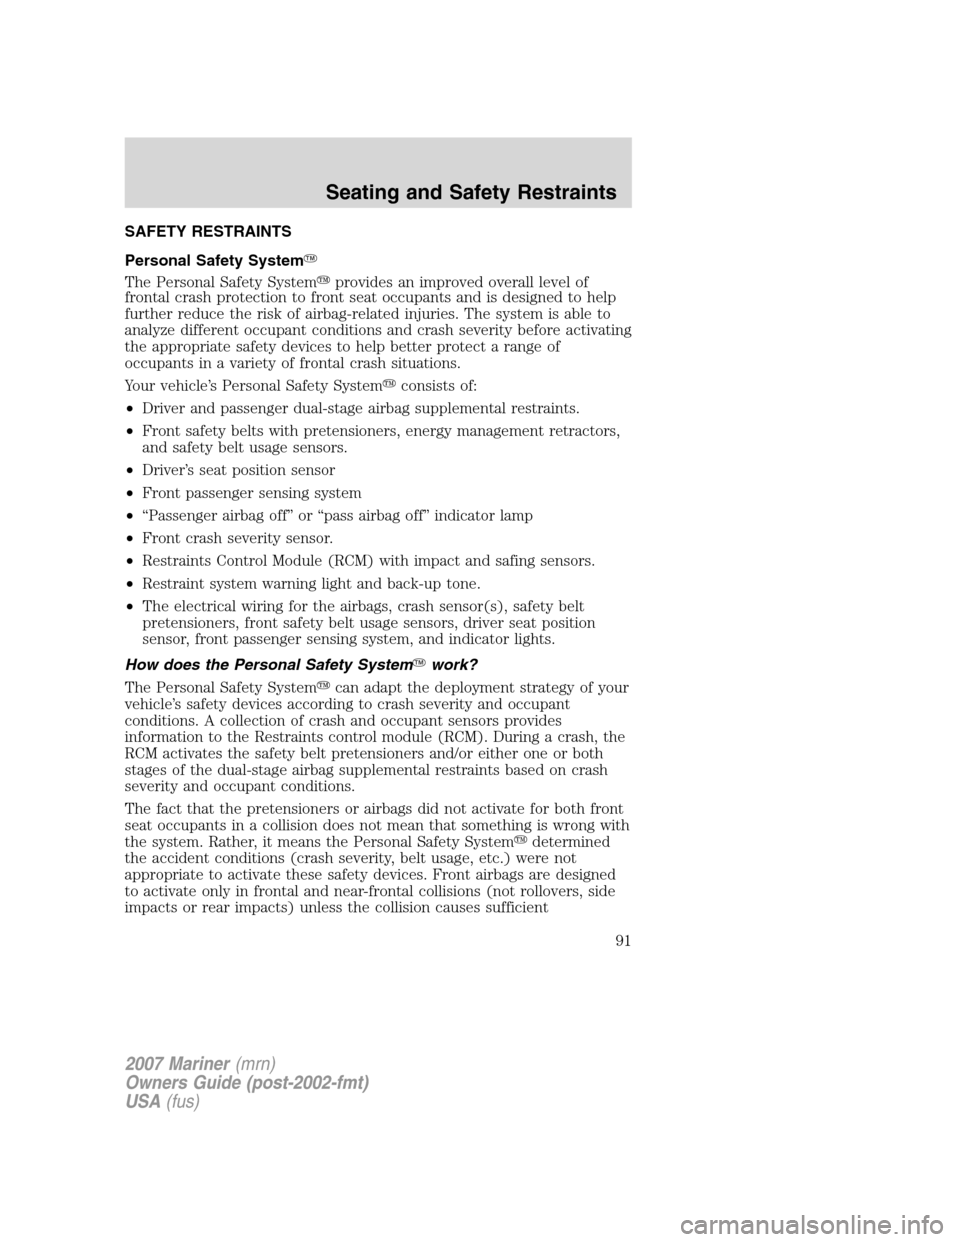 Mercury Mariner 2007  Owners Manuals SAFETY RESTRAINTS
Personal Safety System
The Personal Safety Systemprovides an improved overall level of
frontal crash protection to front seat occupants and is designed to help
further reduce the r